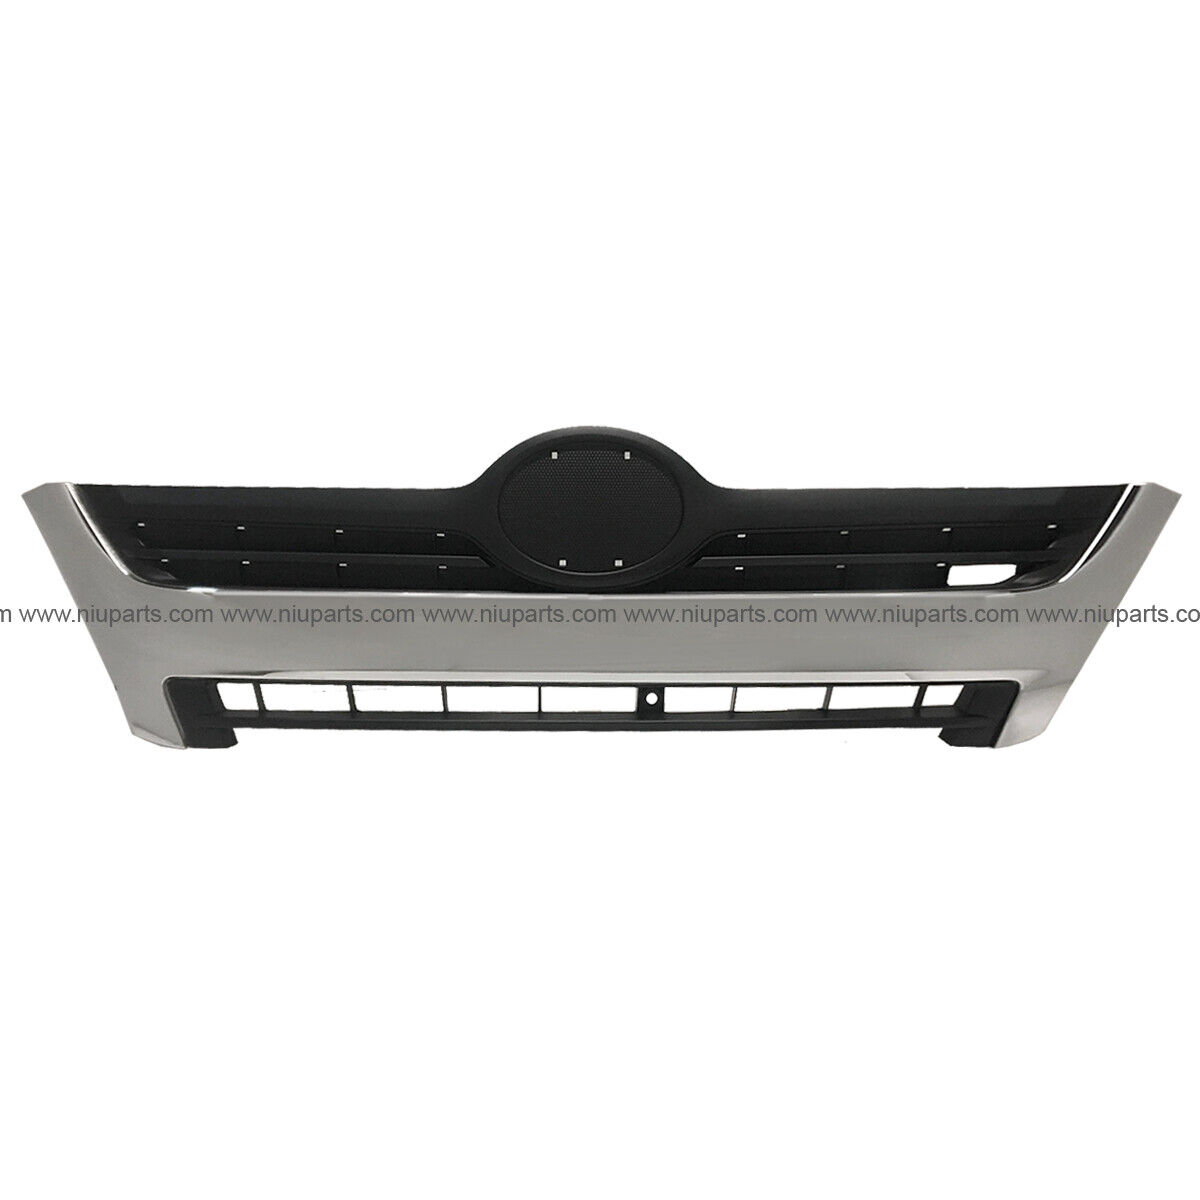 Grille Plastic Dealing full price reduction Chrome Fit: 2012 - Hino 195 165 Phoenix Mall 2019 155